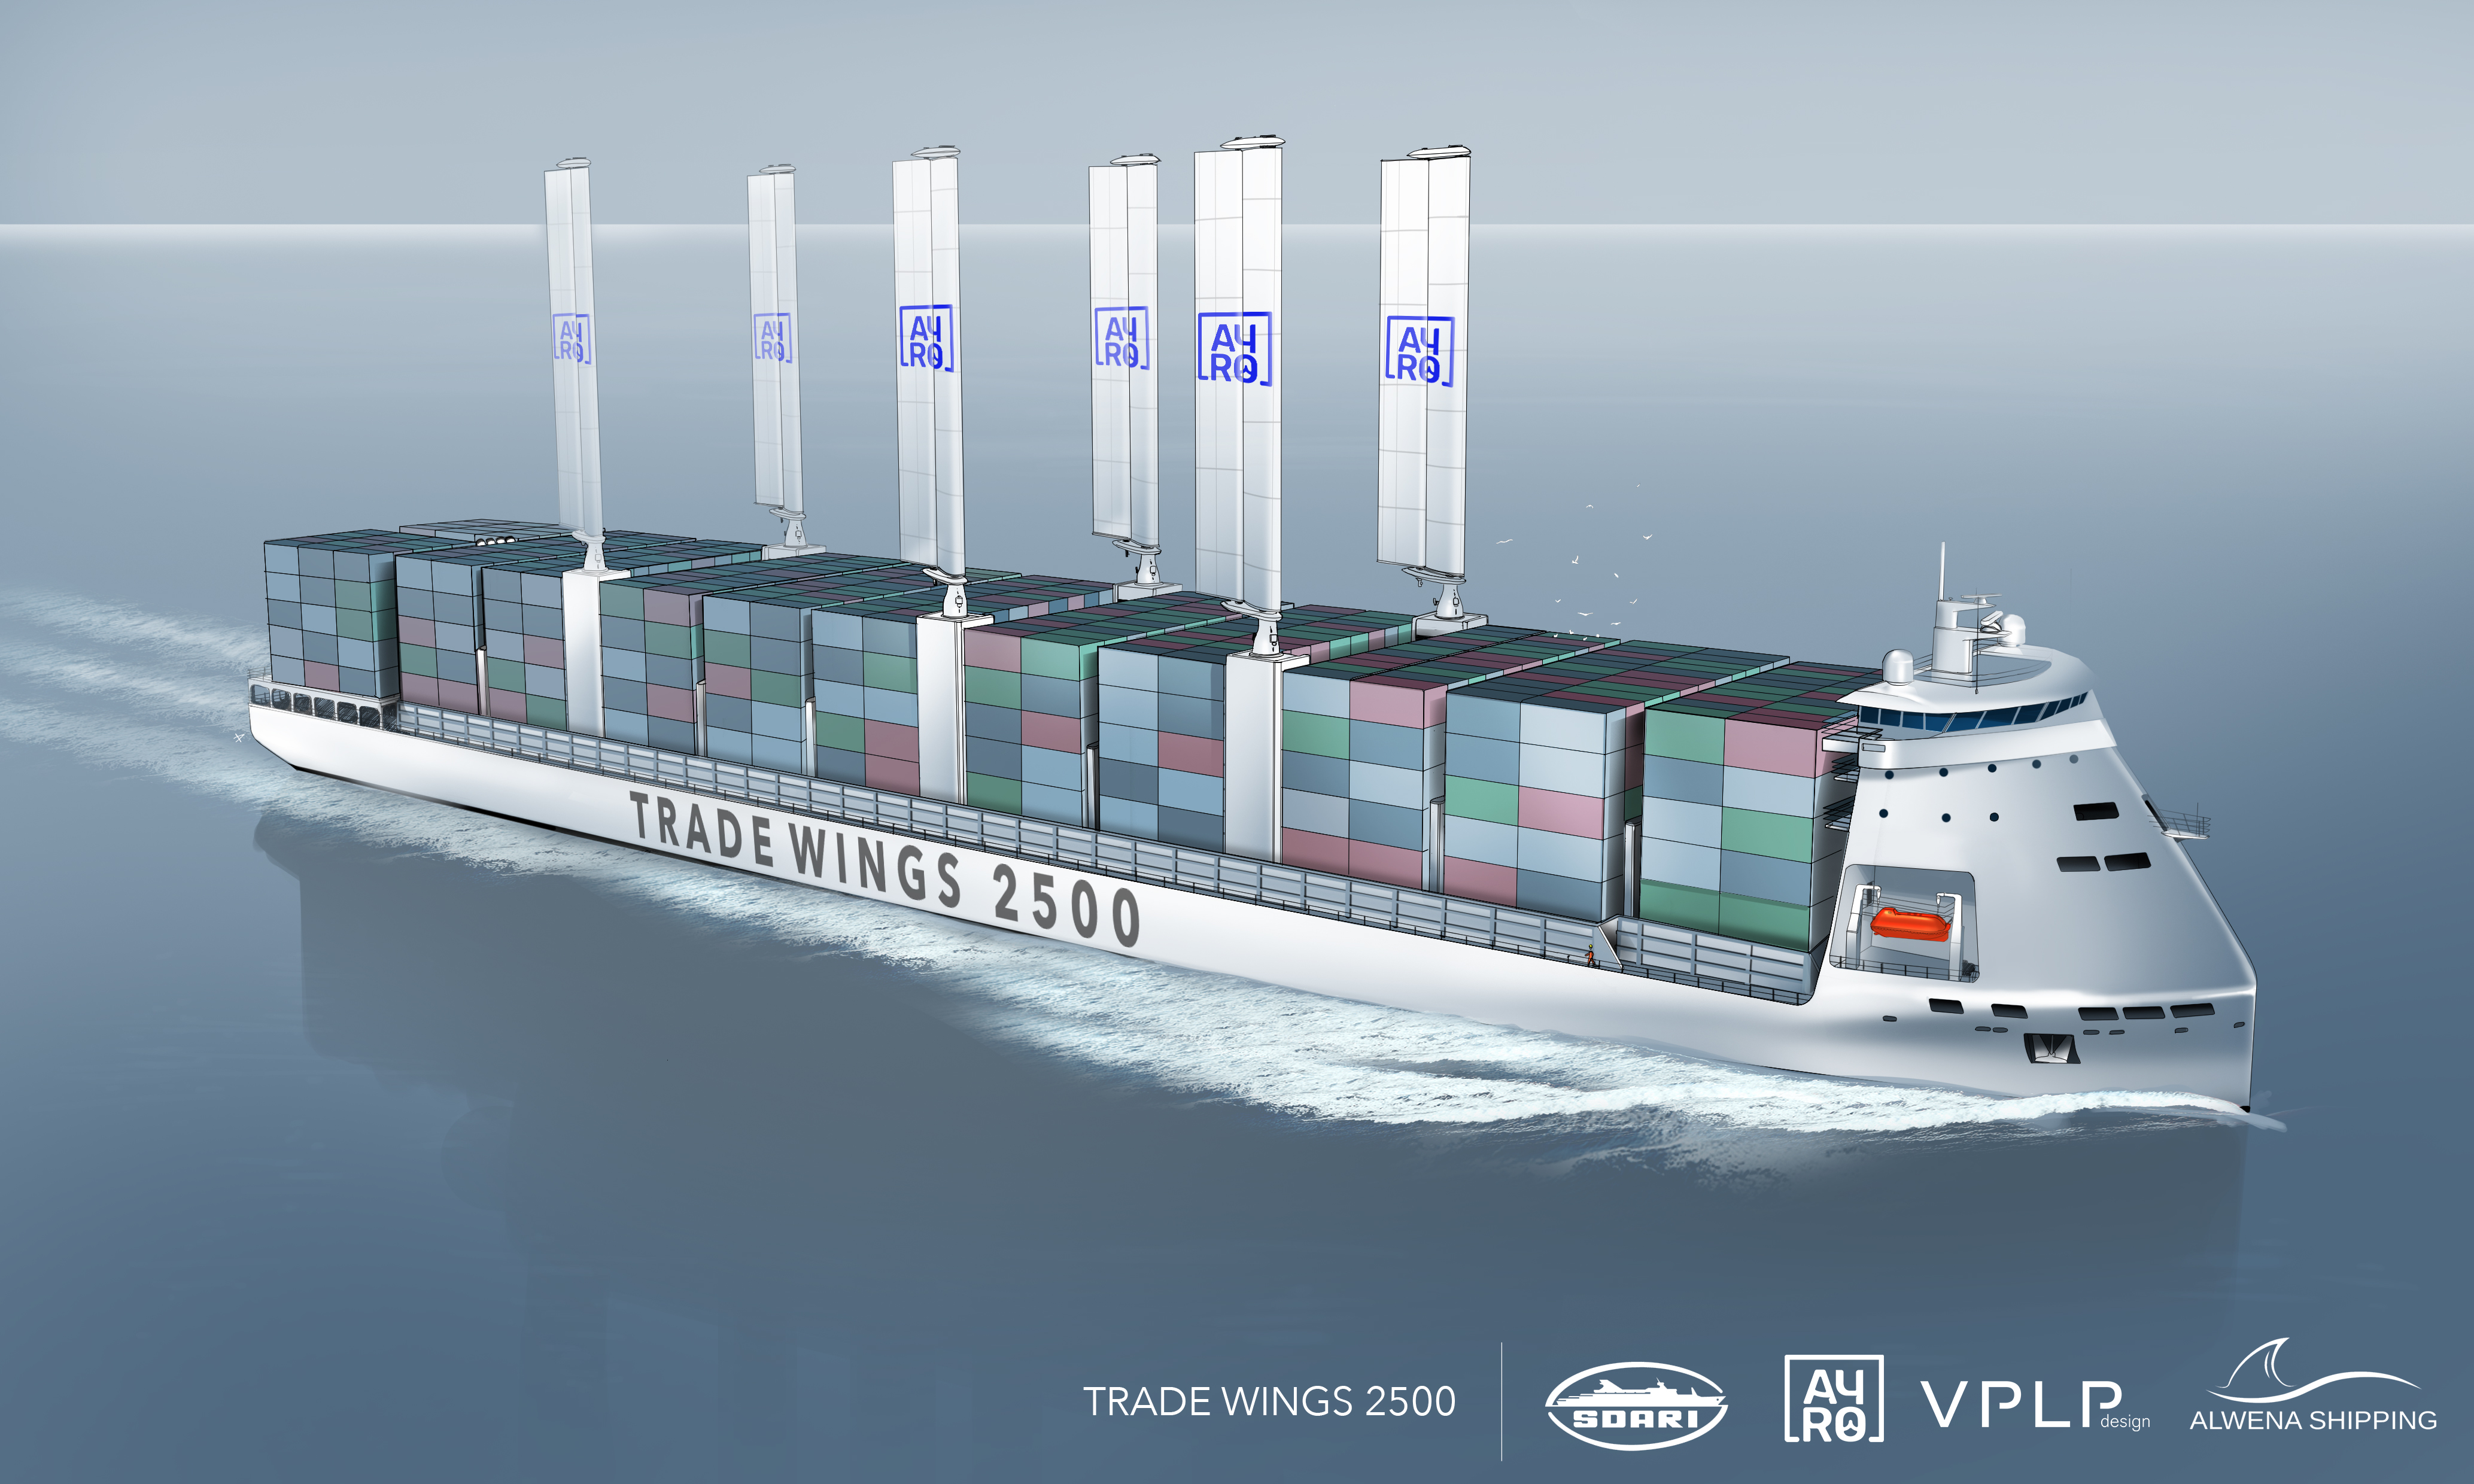 Innovative 2,500 TEU Container Vessel “Trade Wings 2,500” from VPLP Design, Alwena Shipping, SDARI and AYRO receives Approval in Principle from Bureau Veritas